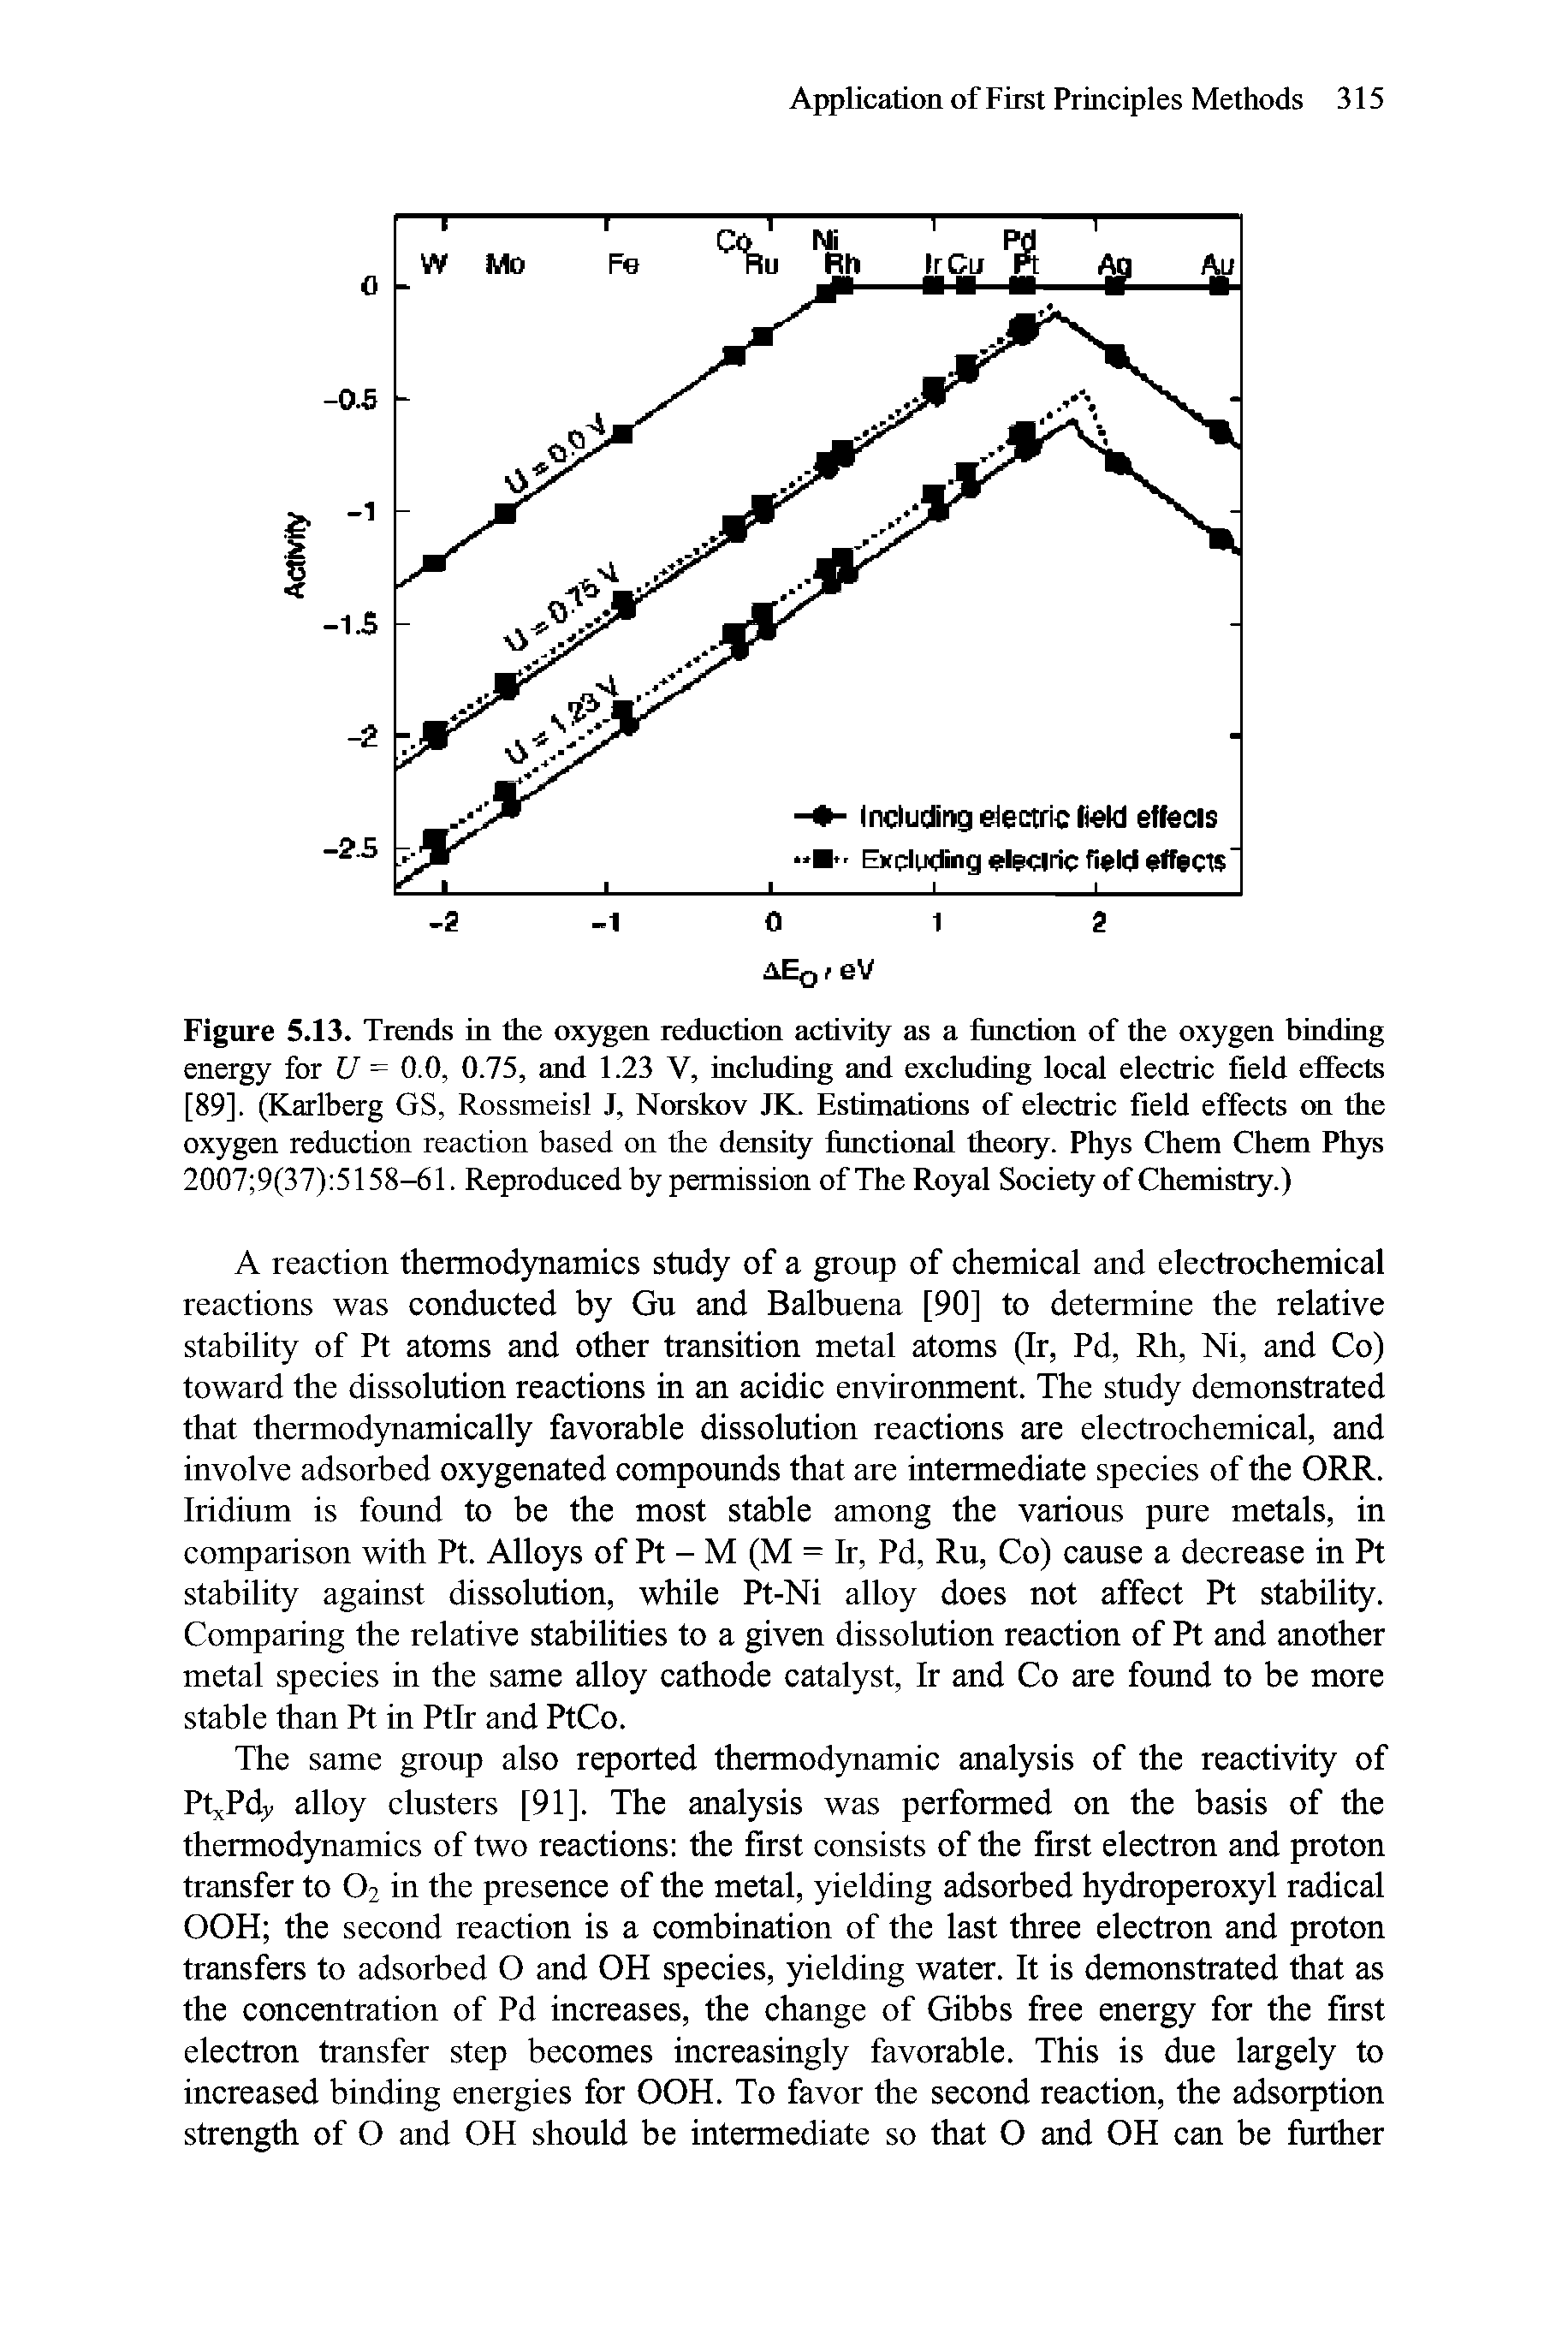 Figure 5.13. Trends in the oxygen reduction activity as a function of the oxygen hinding energy for U = 0.0, 0.75, and 1.23 V, including and excluding local electric field effects [89]. (Karlberg GS, Rossmeisl J, Norskov JK. Estimations of electric field effects on the oxygen reduction reaction based on the density functional theory. Phys Chem Chem Phys 2007 9(37) 5158-61. Reproduced by permission of The Royal Society of Chemistry.)...